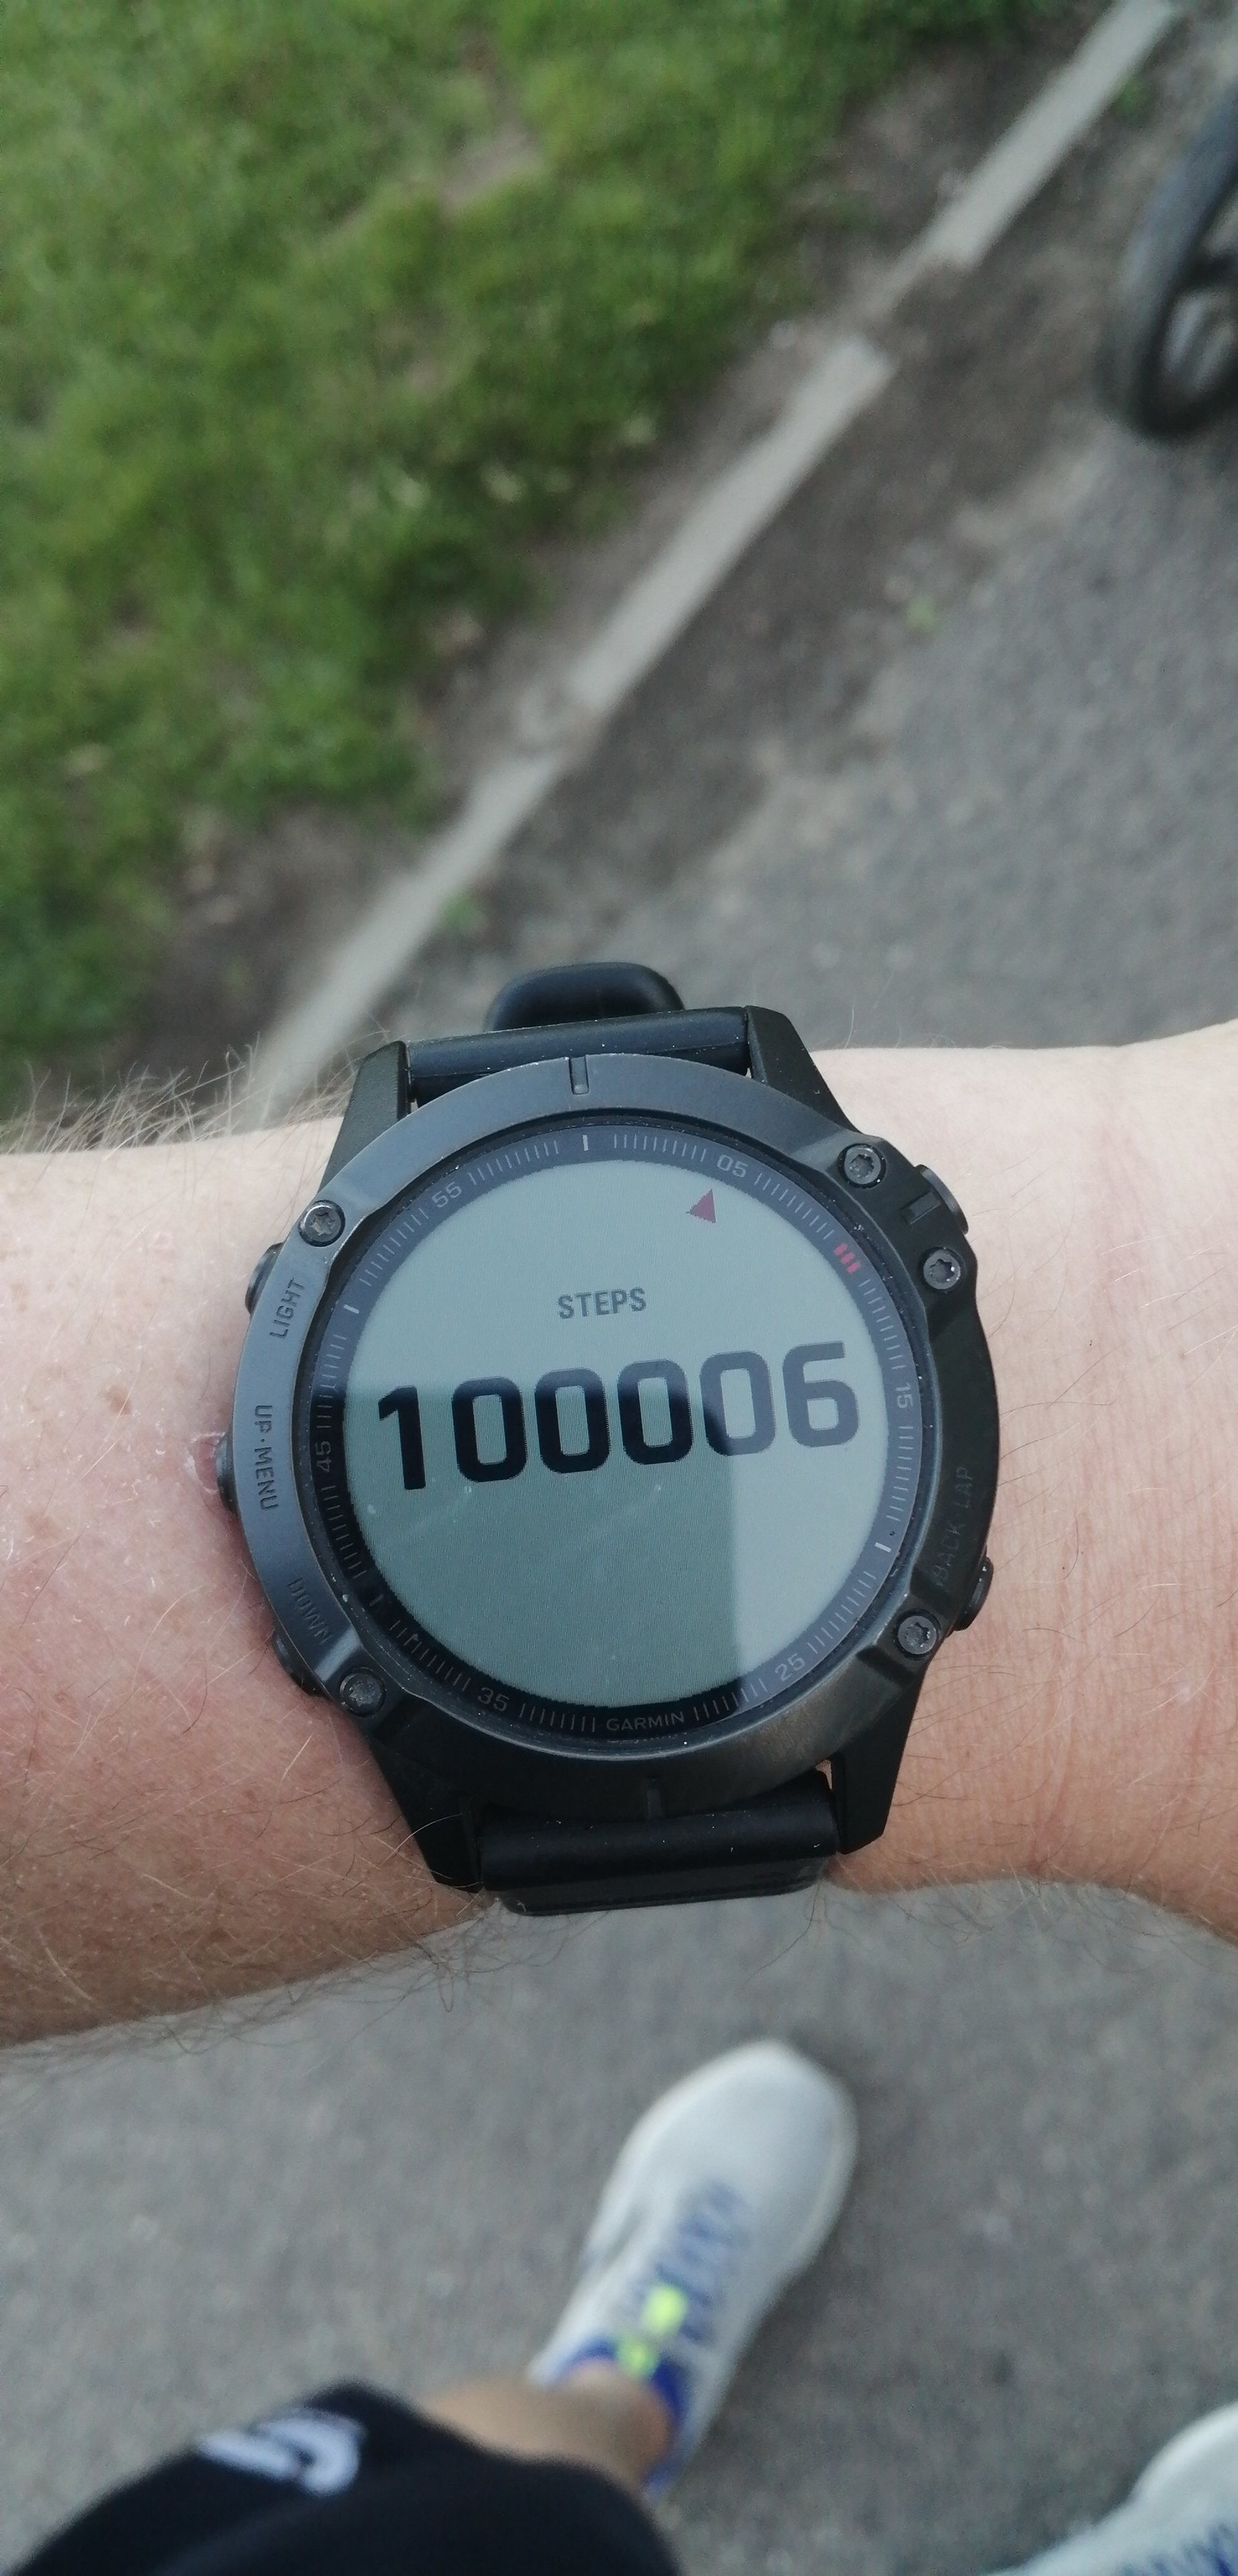 100,000 steps in a day, easy right? - Page 1 - Health Matters - PistonHeads